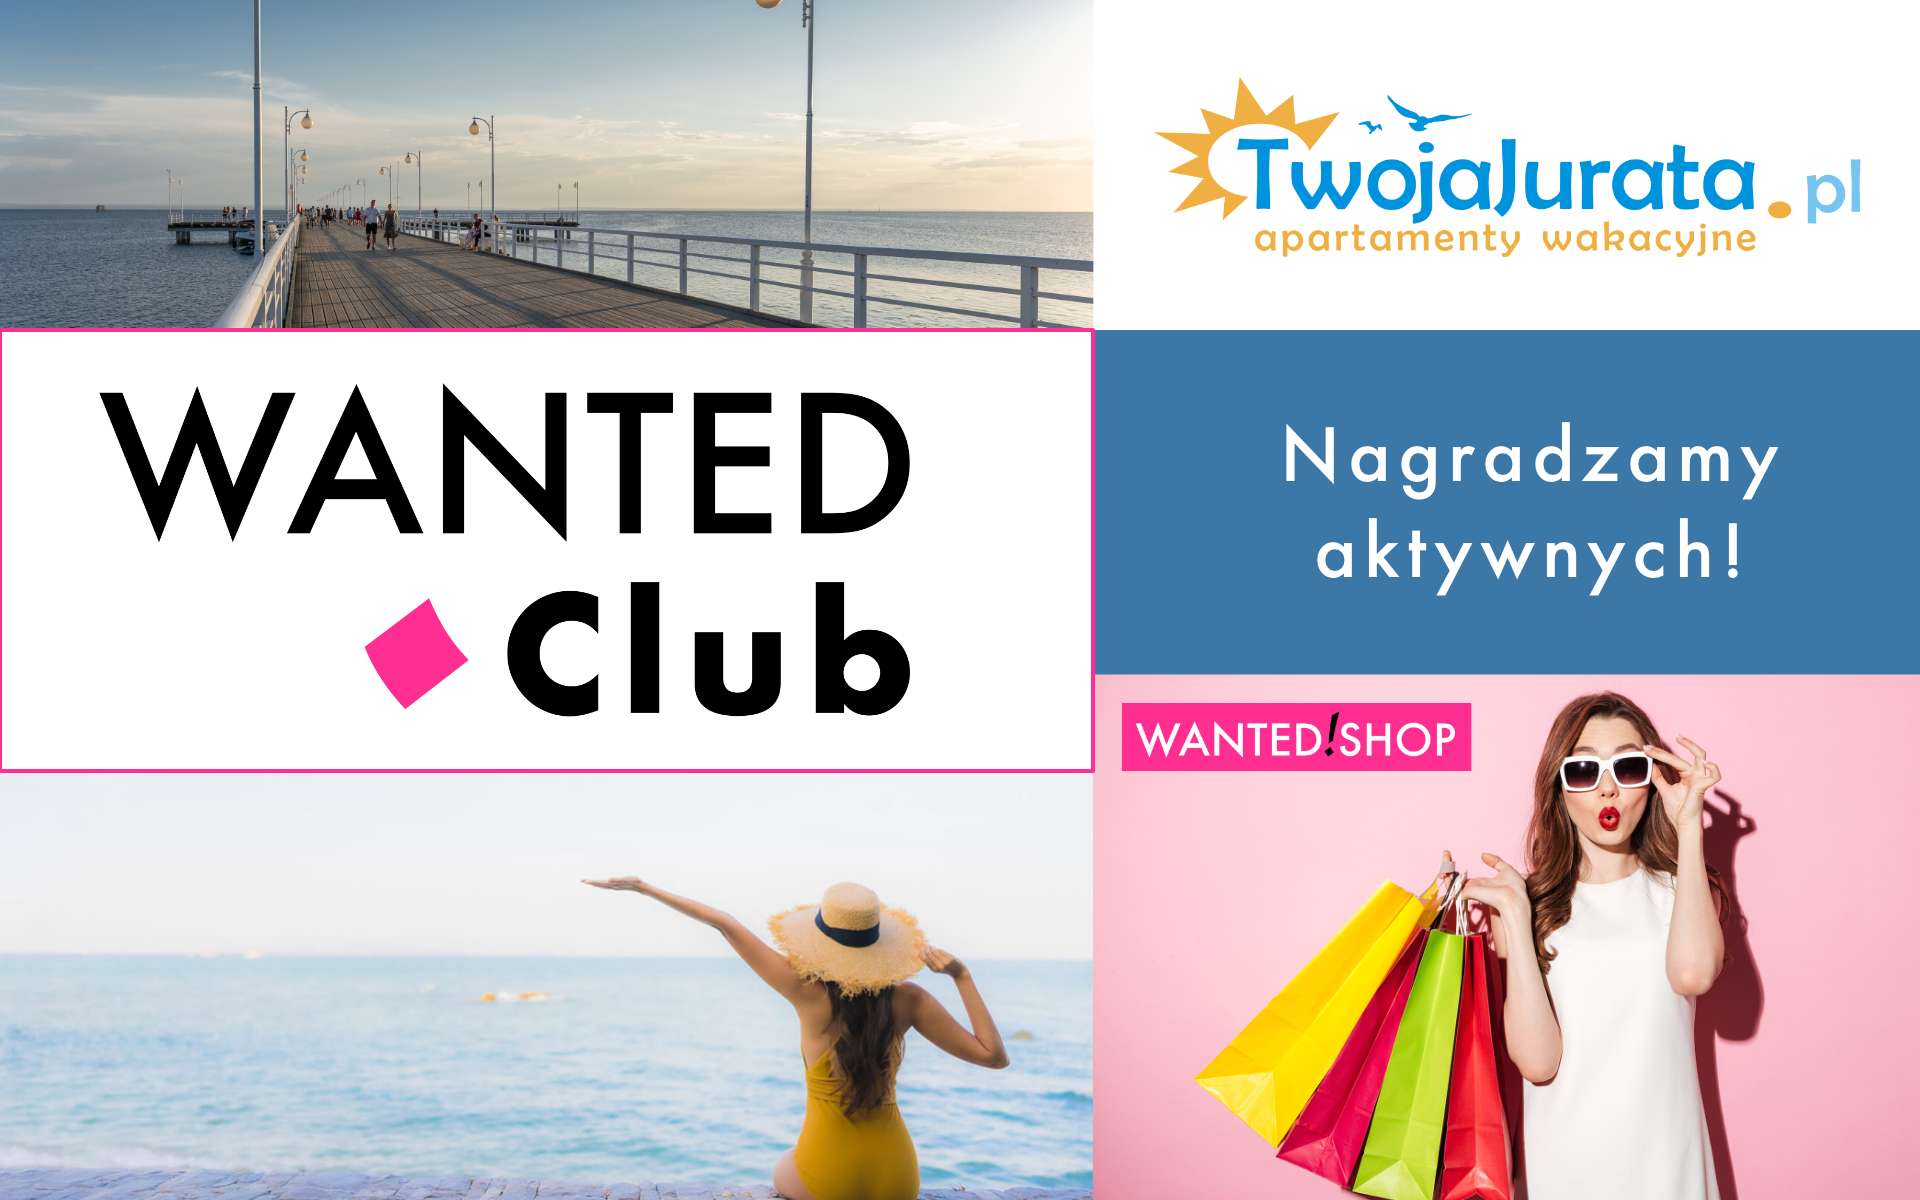 vacation-for-points-in-jurata-wanted-club